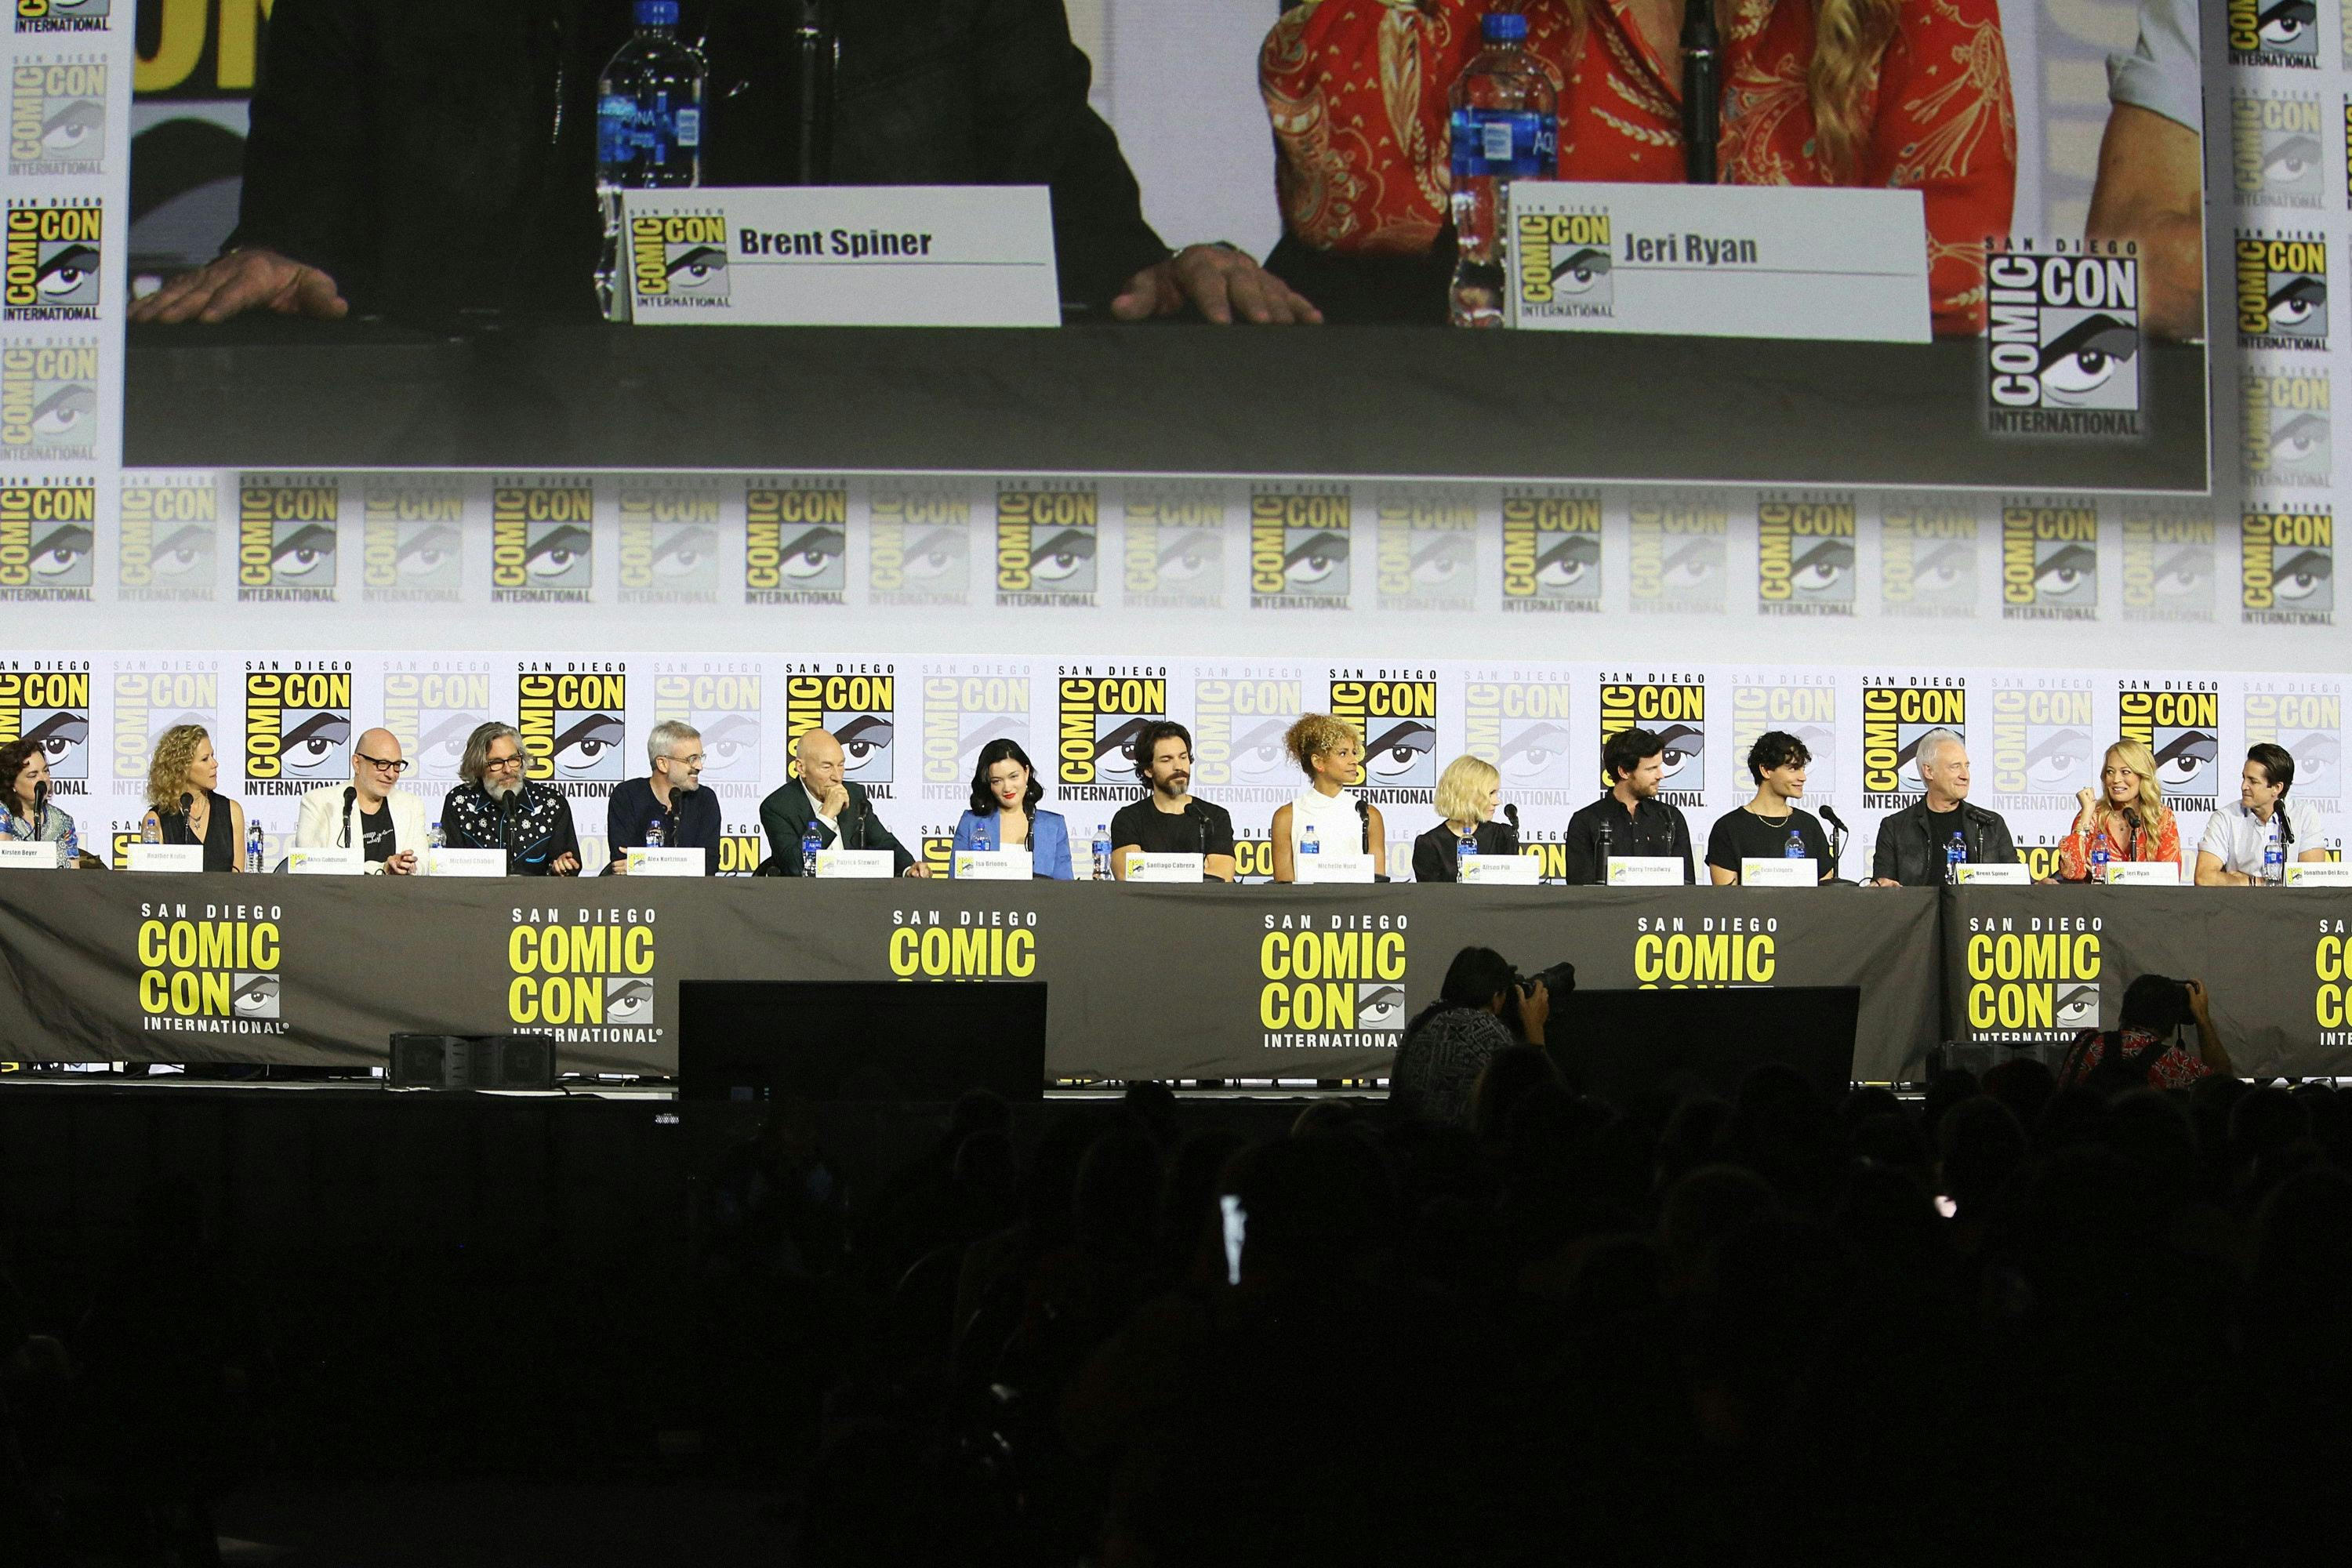 Behold the 'Picard' Panel at SDCC 